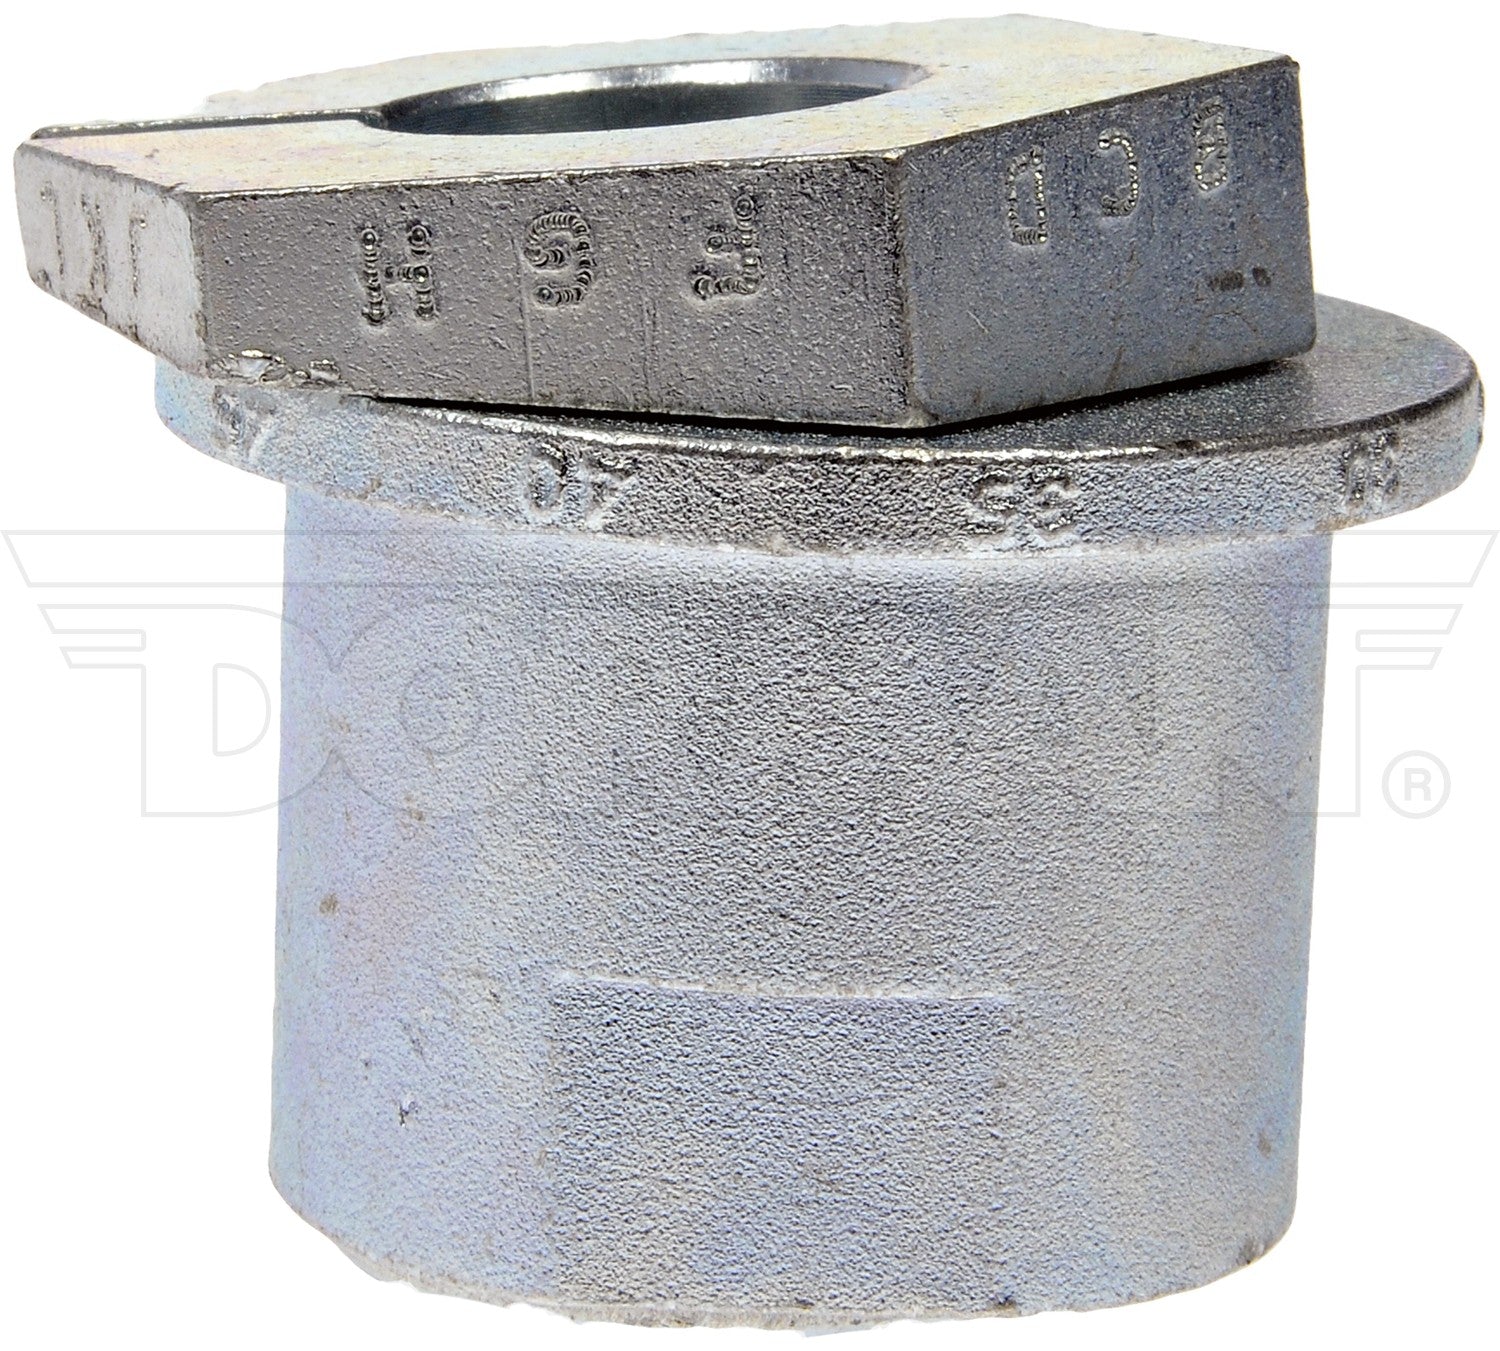 Dorman 545-186 Front Alignment Caster / Camber Bushing for Ford Bronco II F-100 F-150 F-250 F-350 Ranger RWD